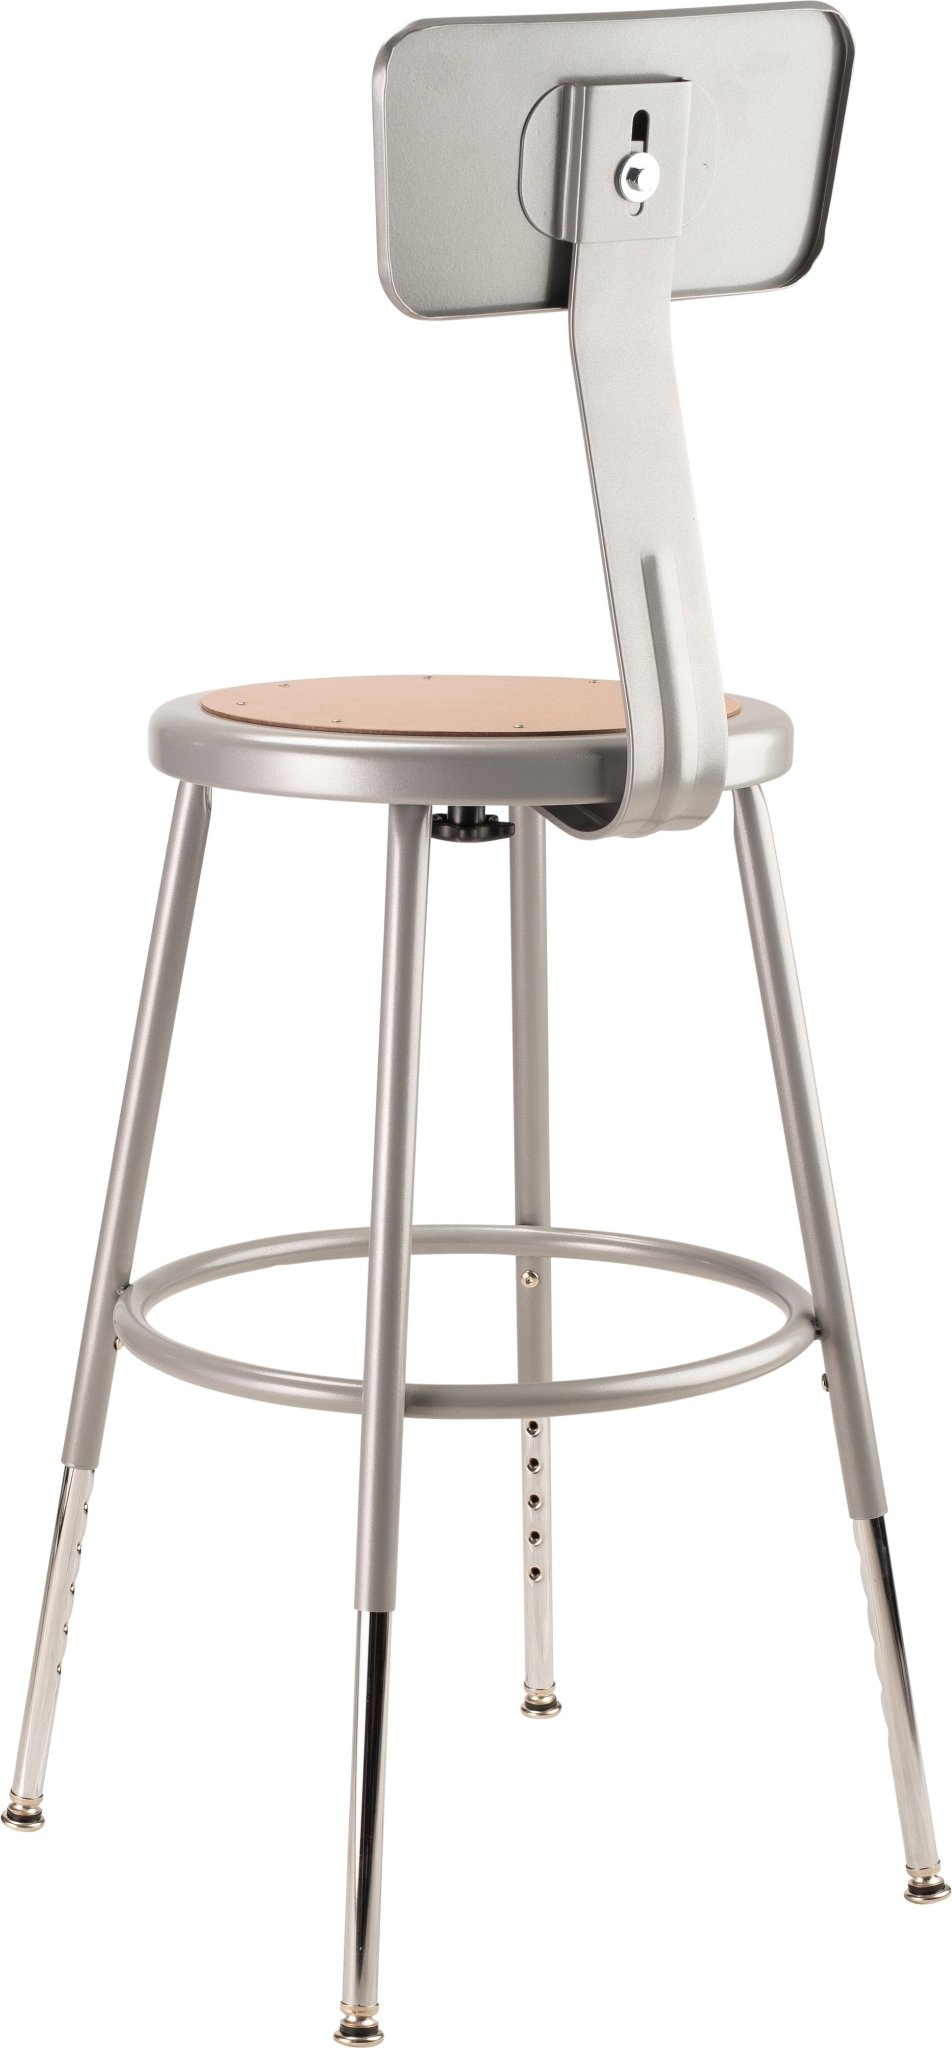 NPS 18.5 - 26.5" H Height Adjustable Heavy Duty Steel Stool with Backrest (National Public Seating NPS-6218HB) - SchoolOutlet